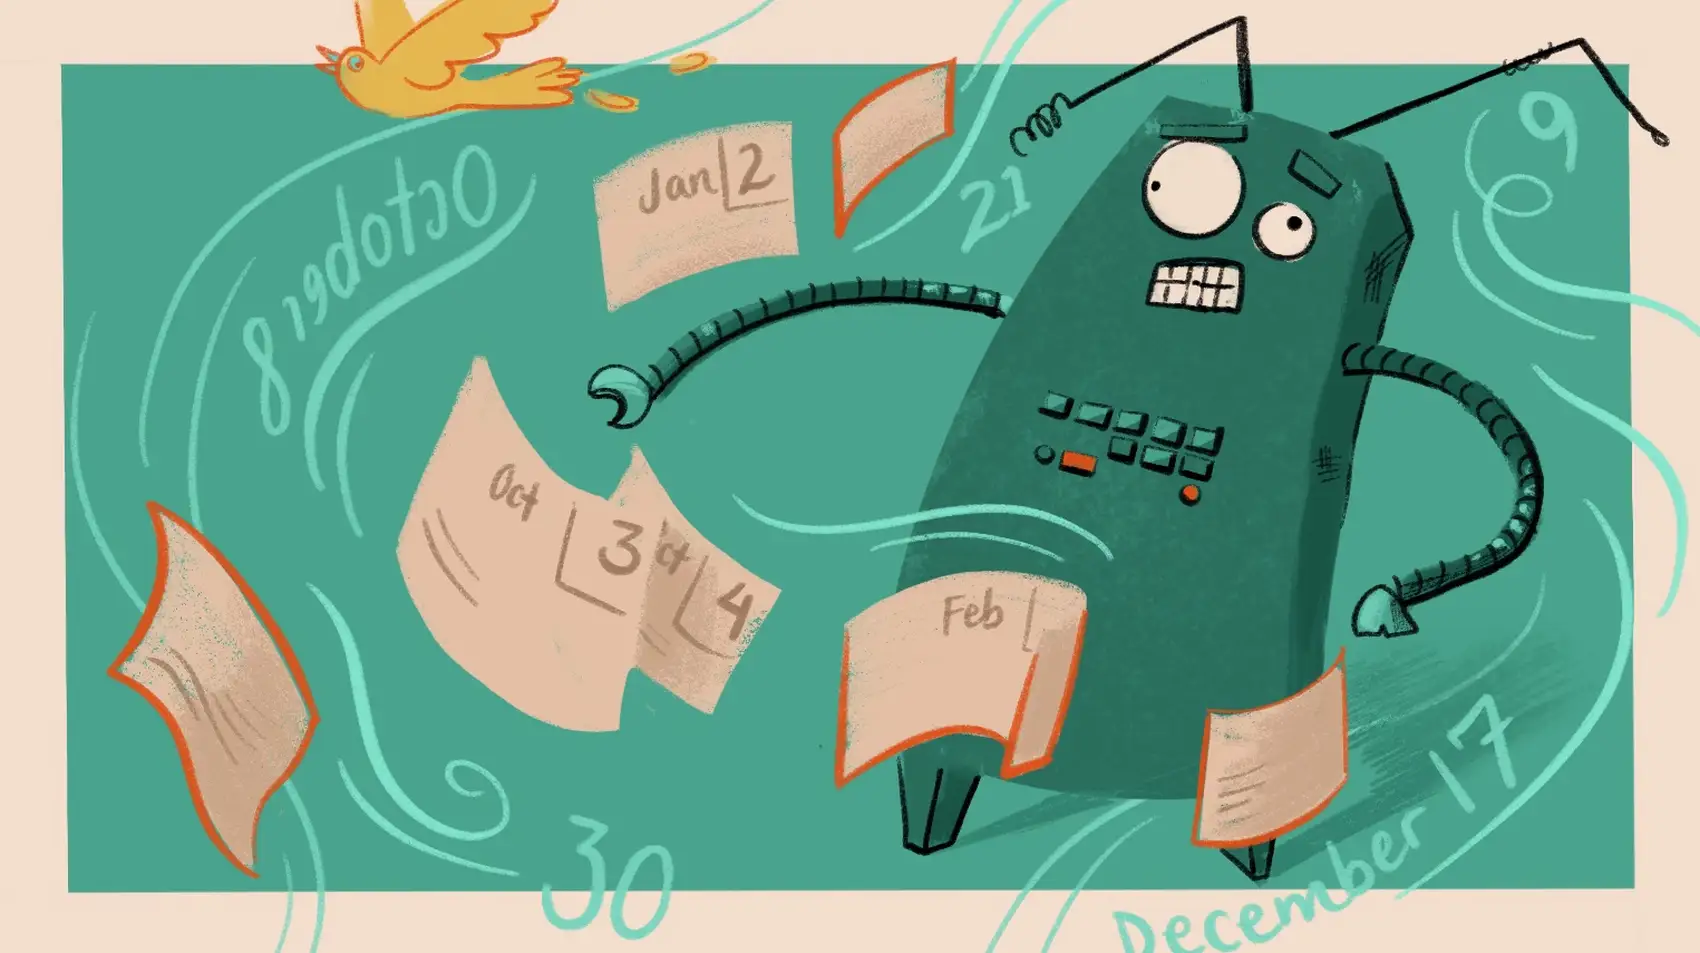 A robot assistant confused about dates with calendar dates swirling around it.